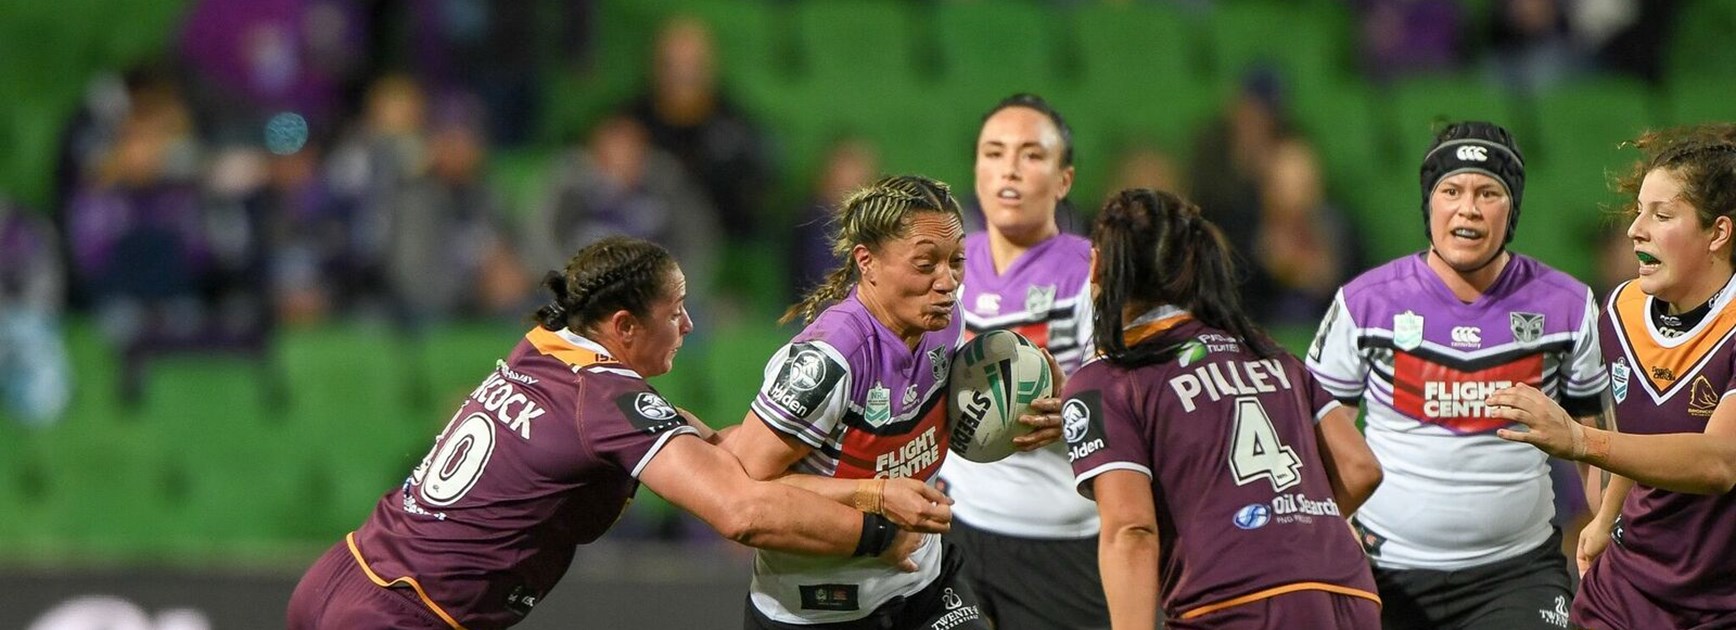 Unbeaten Broncos charge into NRLW grand final